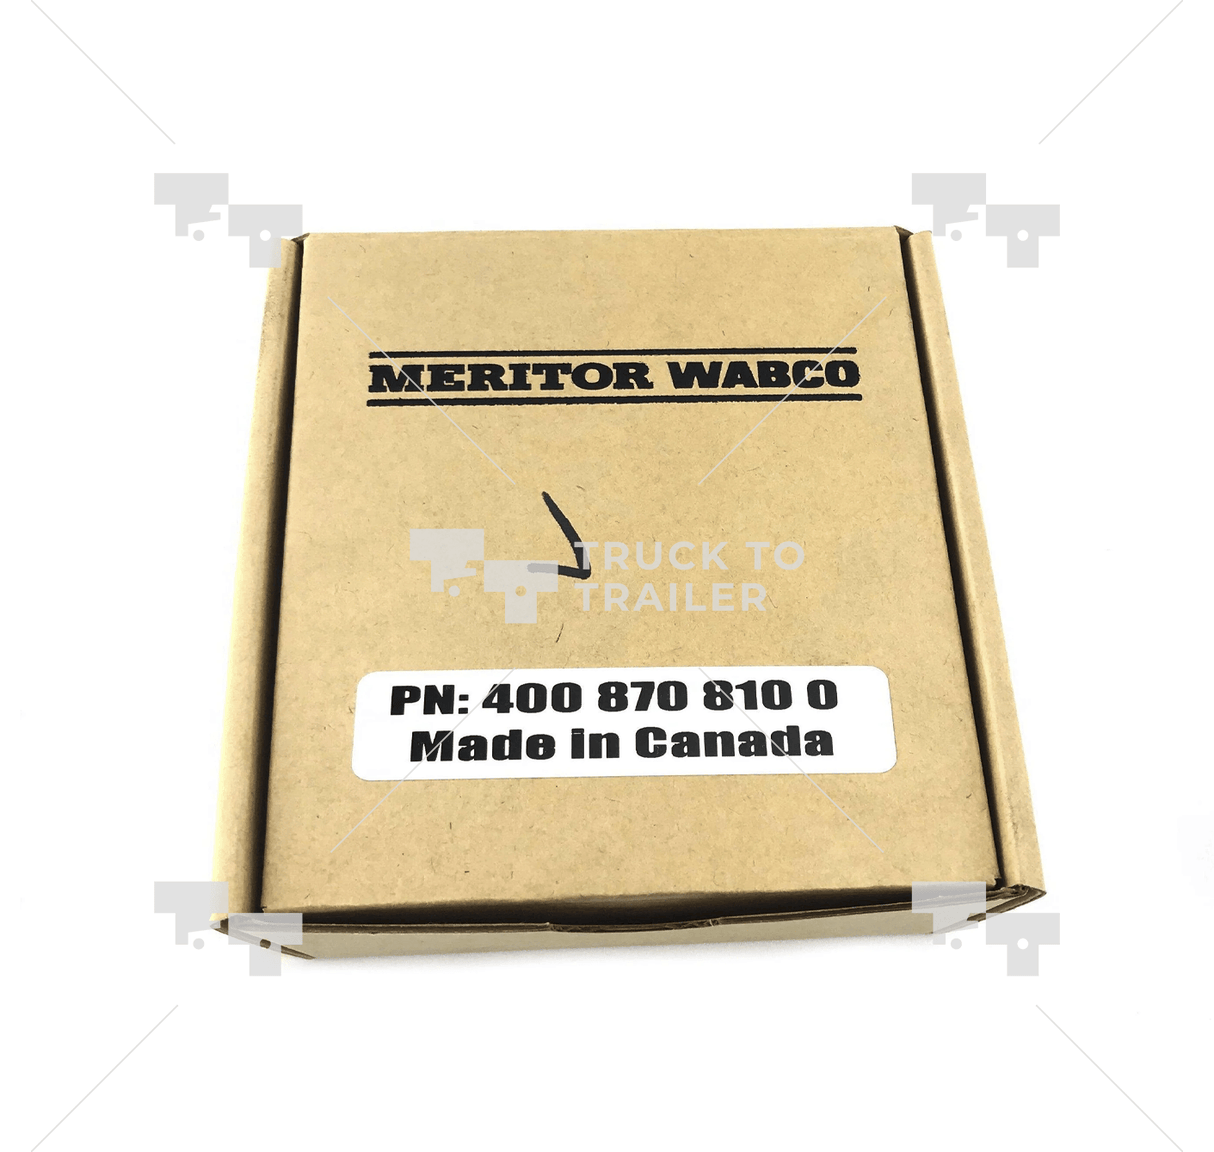 S4008708100 Wabco Meritor® Drive Display On-Guard Collision System.